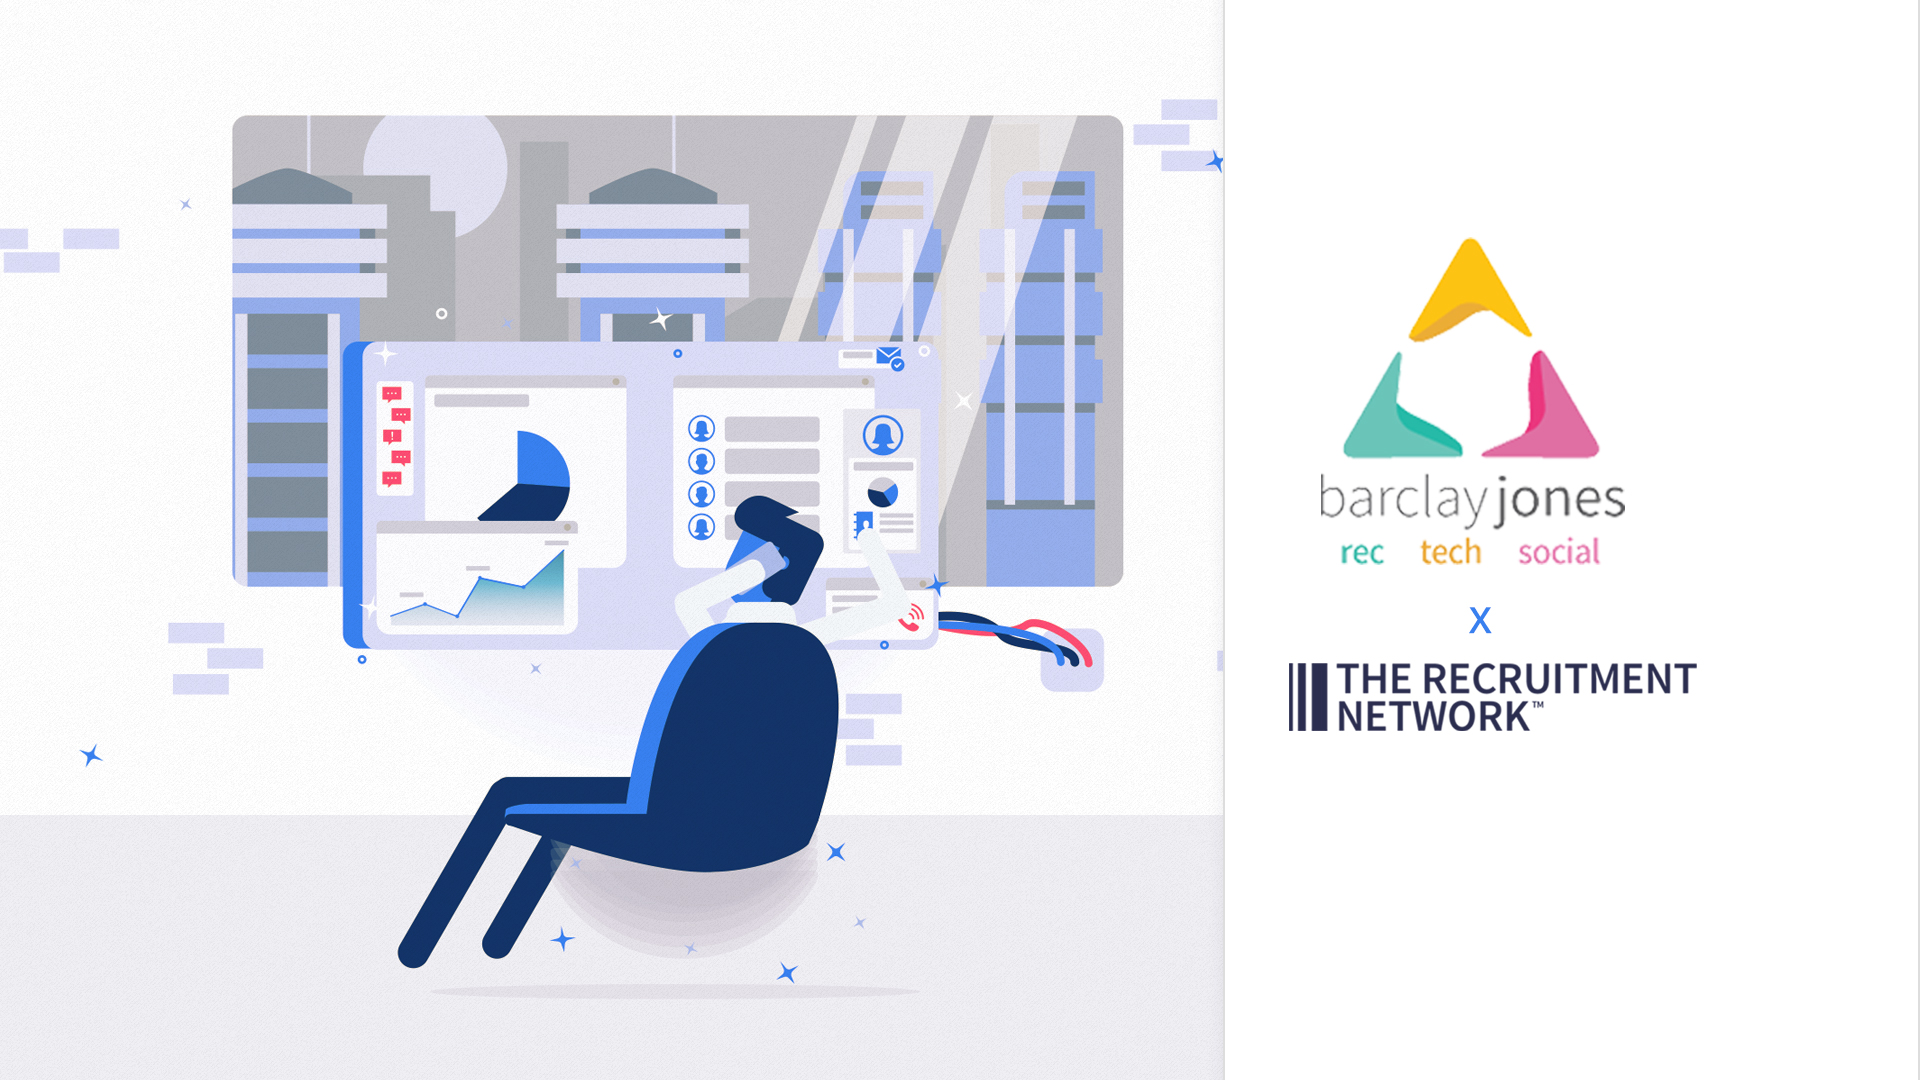 Future Recruiting – the DNA of a Recruiter in 2020 | Barclay Jones colab with The Recruitment Network